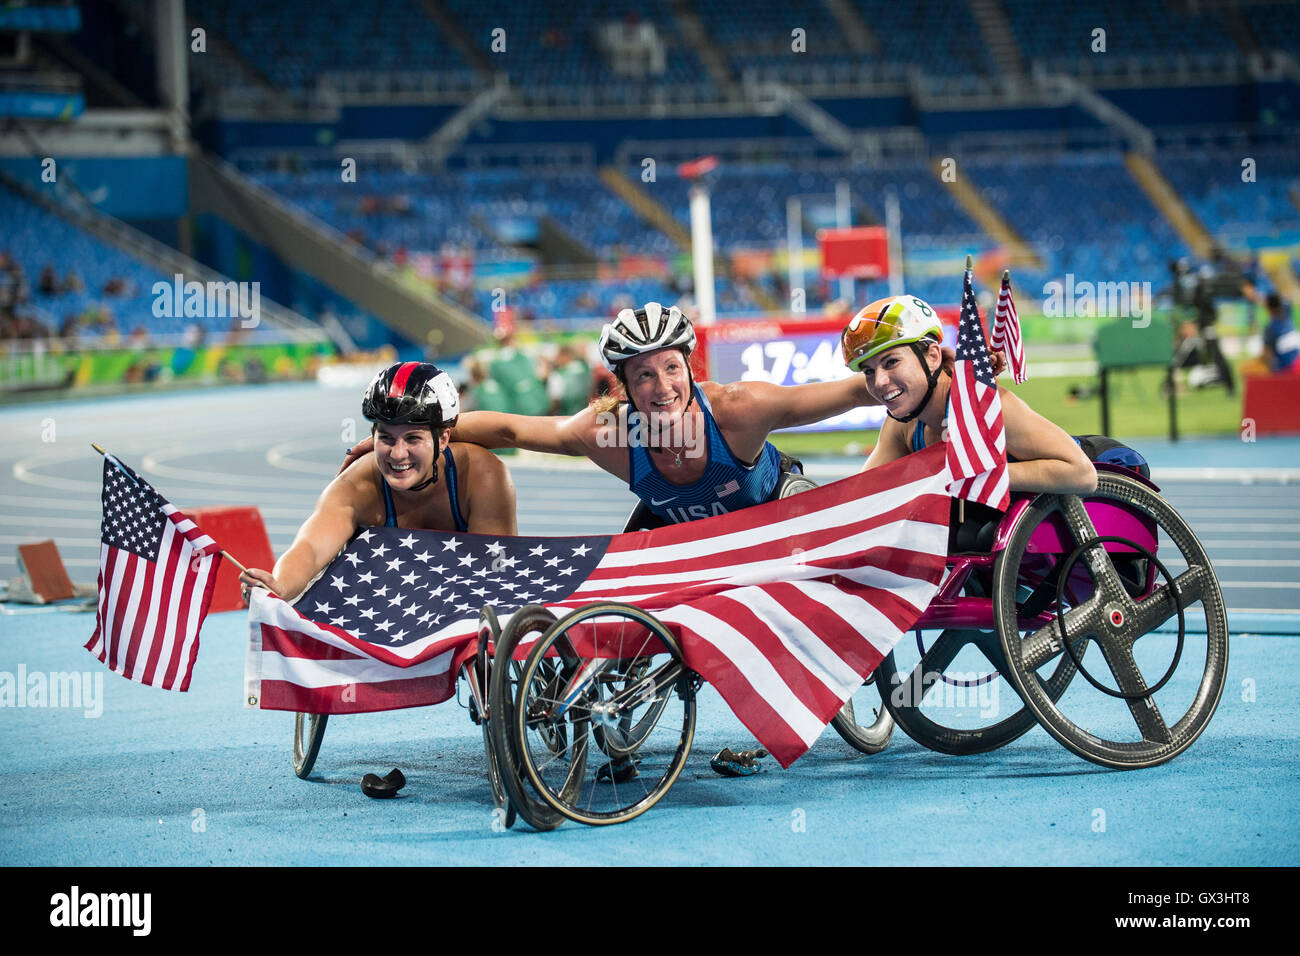 Rio De Janeiro, Brazil. 15th Sep, 2016. McFADDEN Tatyana (USA), McCLAMMER Chelsea (USA) and Amanda McGrory (USA) in the test of female shallow 5000m T54 during the Athletics Paralimpíada 2016 held at the Olympic Stadium (Engenhão). © Celso Pupo/FotoArena/Alamy Live News Stock Photo